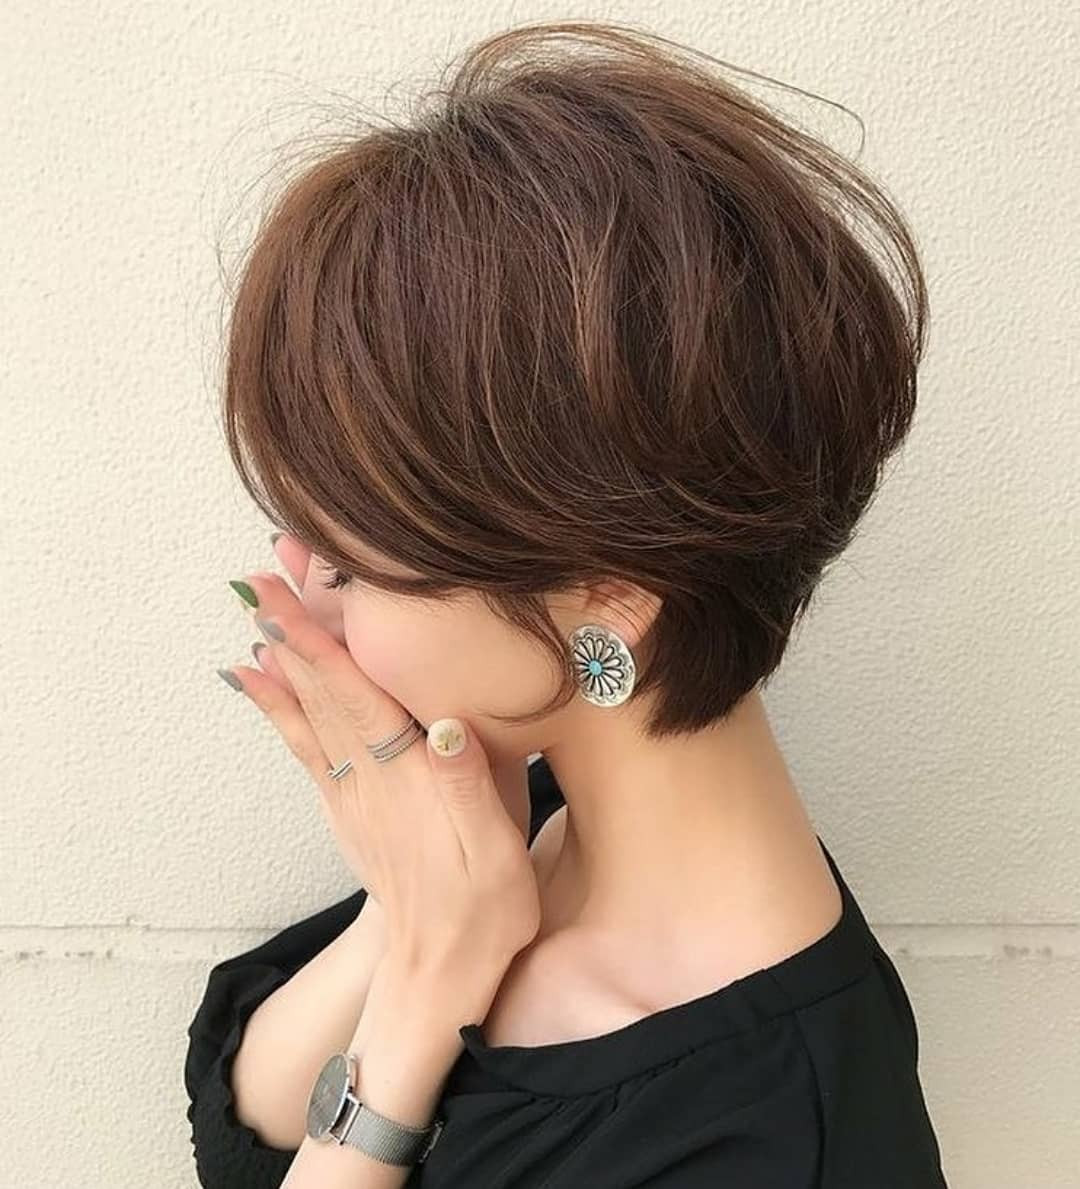 Haircuts For Young Women
 10 Cute Short Hairstyles and Haircuts for Young Girls